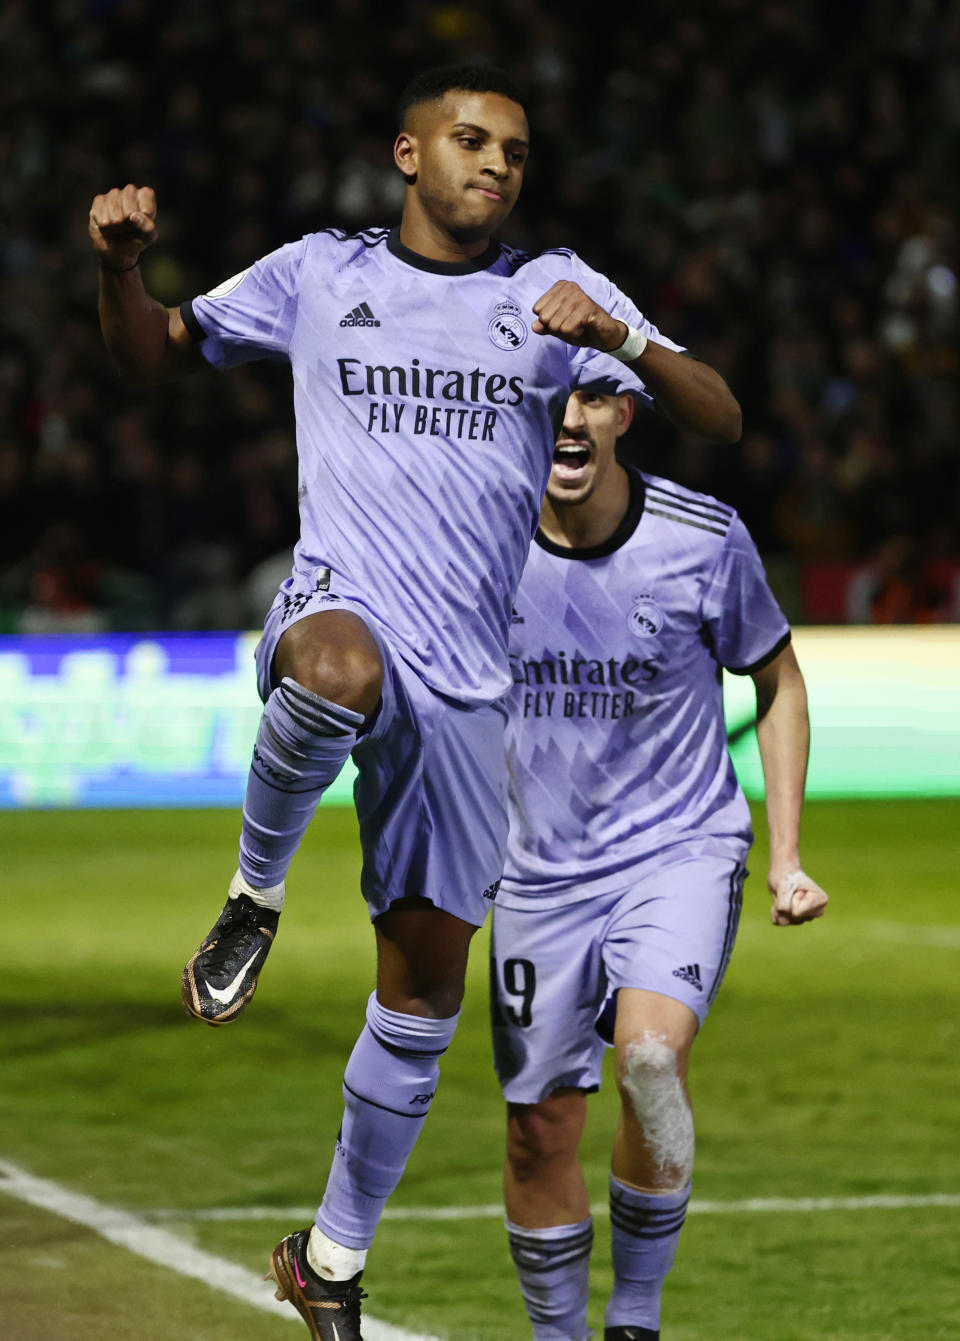 Real Madrid's Rodrygo, front, celebrates with Dani Ceballos after scoring the opening goal during a Spanish Copa del Rey round of 32 soccer match between Cacereno and Real Madrid at the Principe Felipe stadium in Caceres, Spain, Tuesday Jan. 3, 2023. (AP Photo/Pablo Garcia)